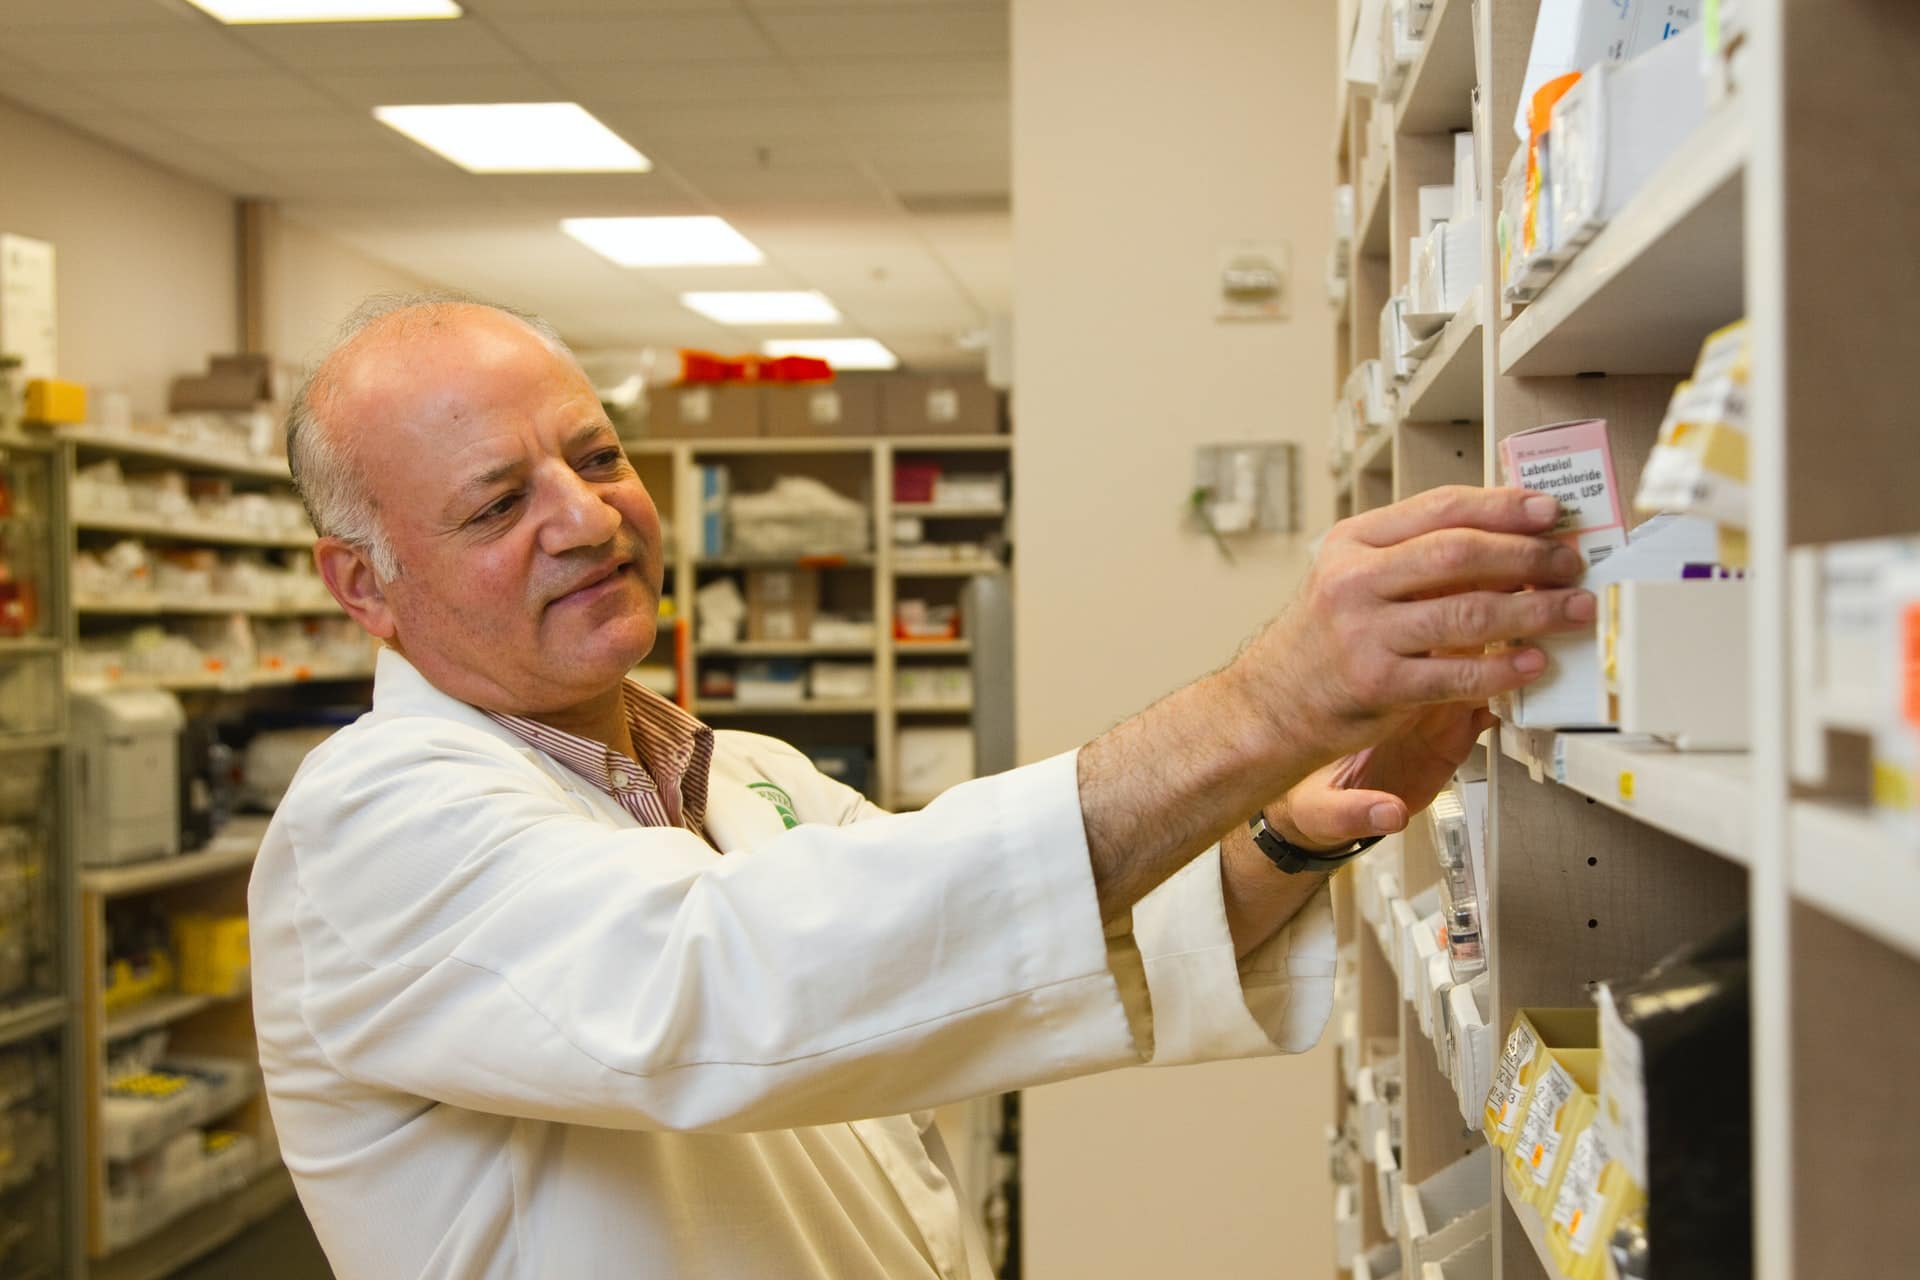 Pharmacist removing a medication from a pharmacy shelf /